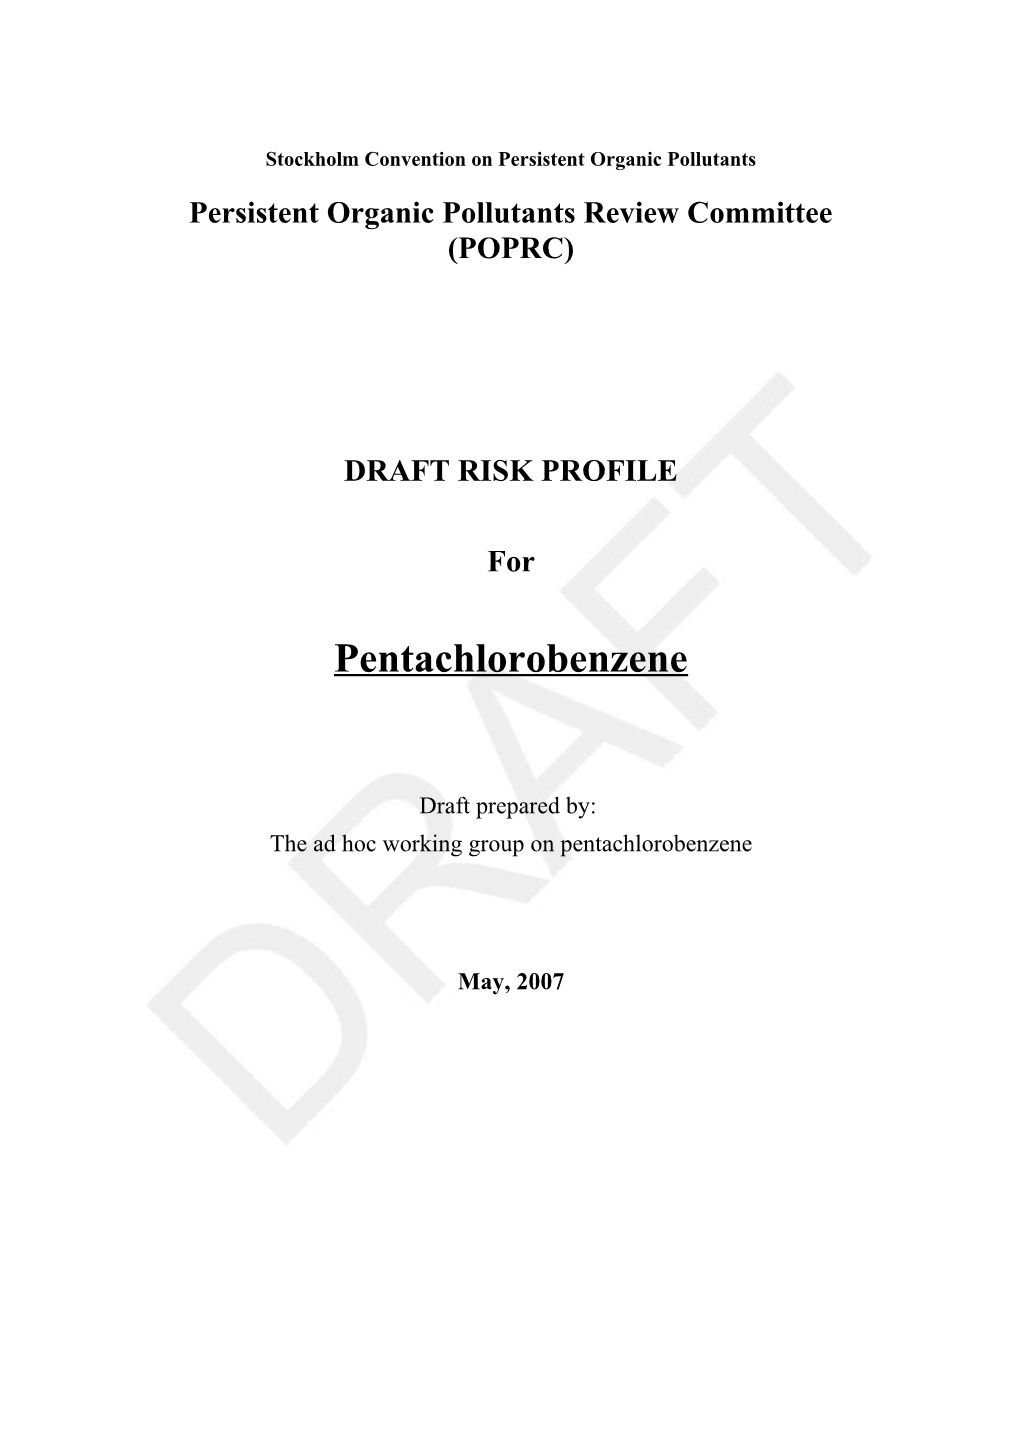 Persistent Organic Pollutants Review Committee